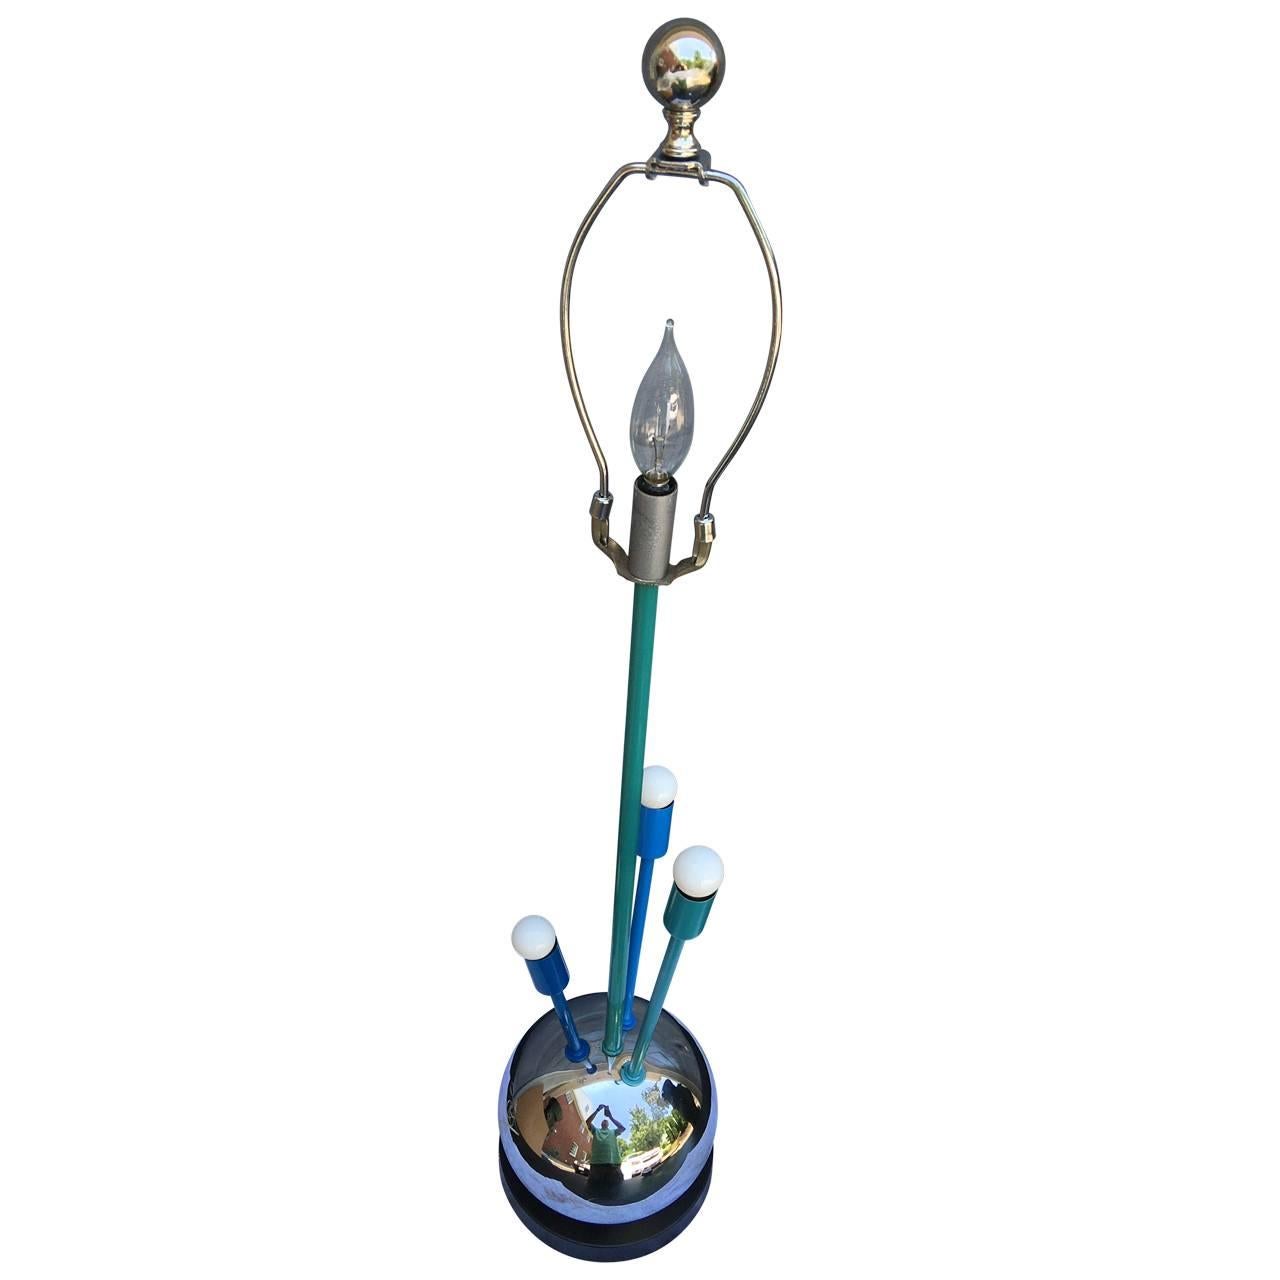 Mid-Century Modern table lamp in the style of Sputnik.
This tall and shiny table lamp has a chrome ball base with newly powder coated teal/blue metal blue stems with small white bulbs and a center globe stalk. The lamp is modern and bright and will